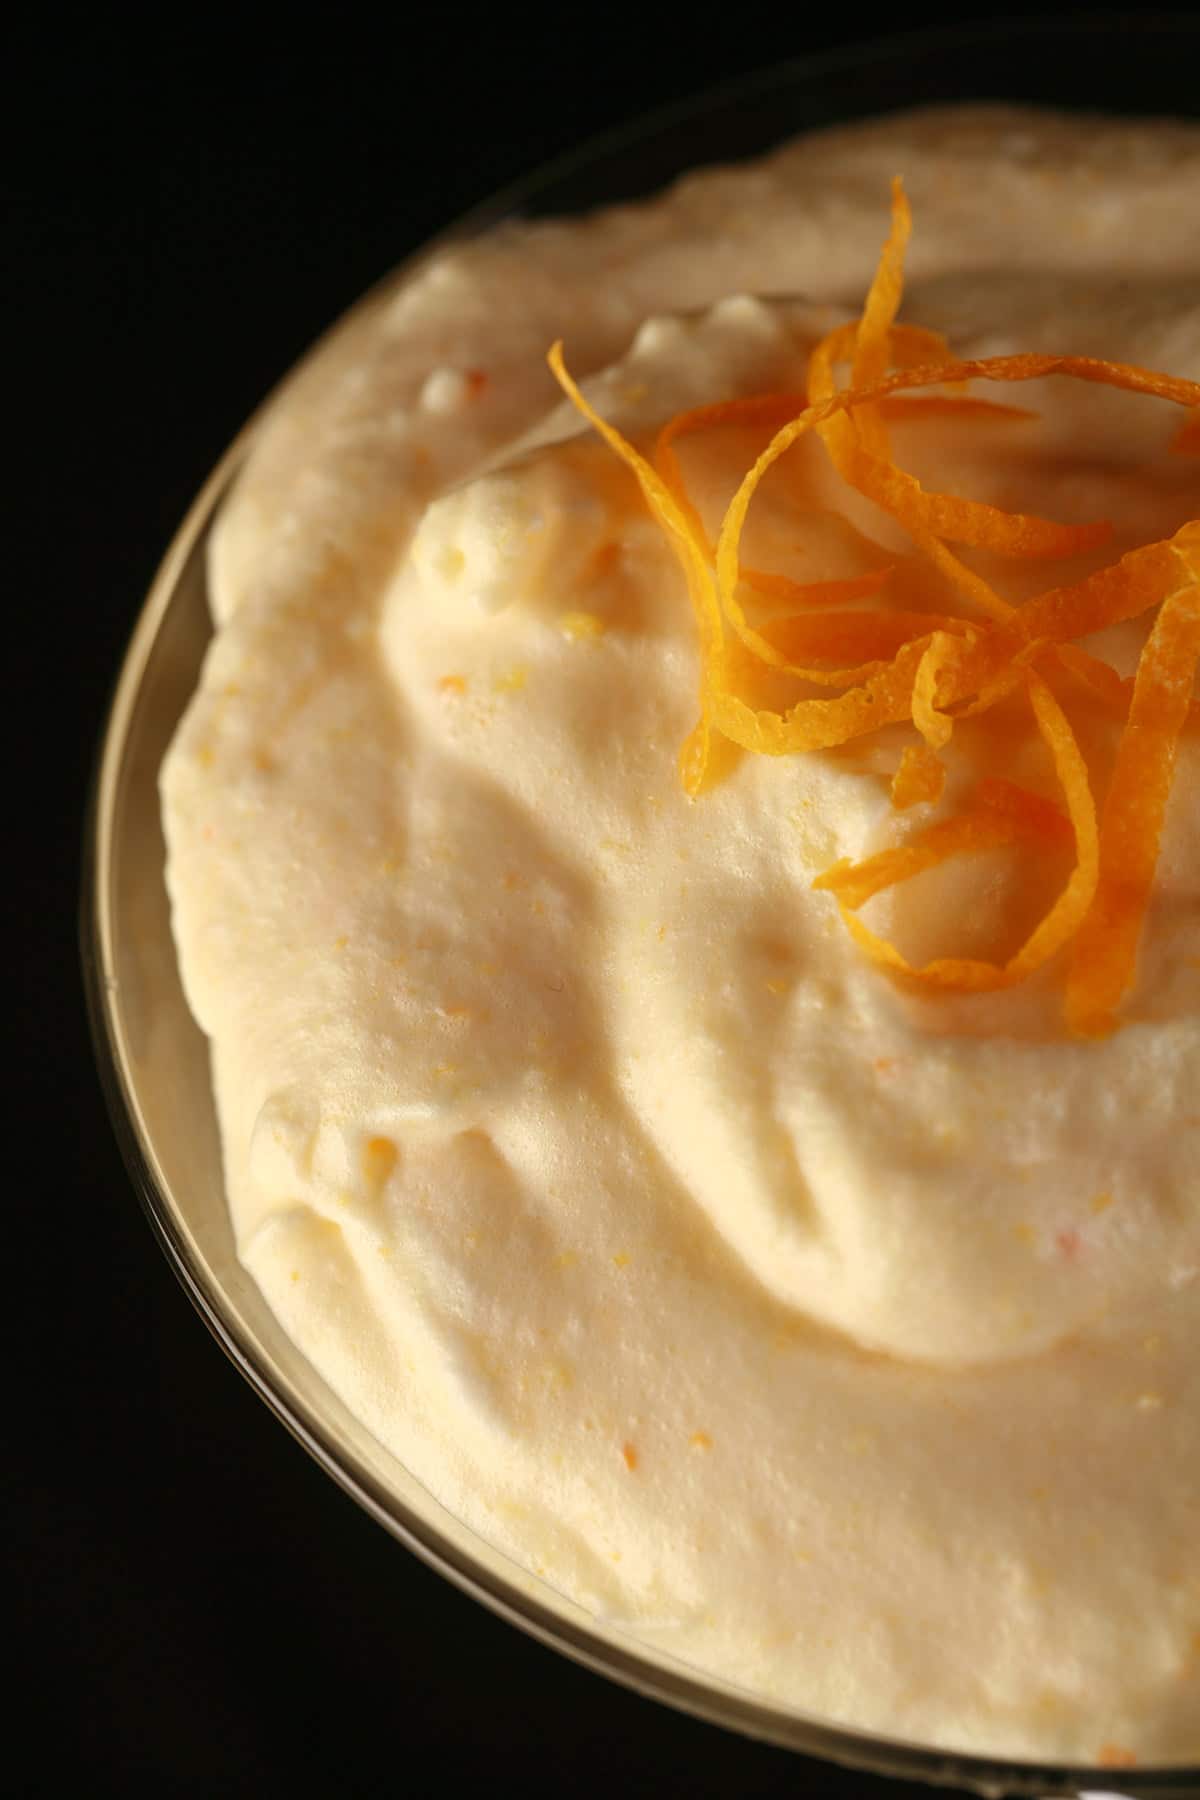 A very close up view of lightly orange coloured mousse. It has a small mound of clementine zest twists piled in the middle.